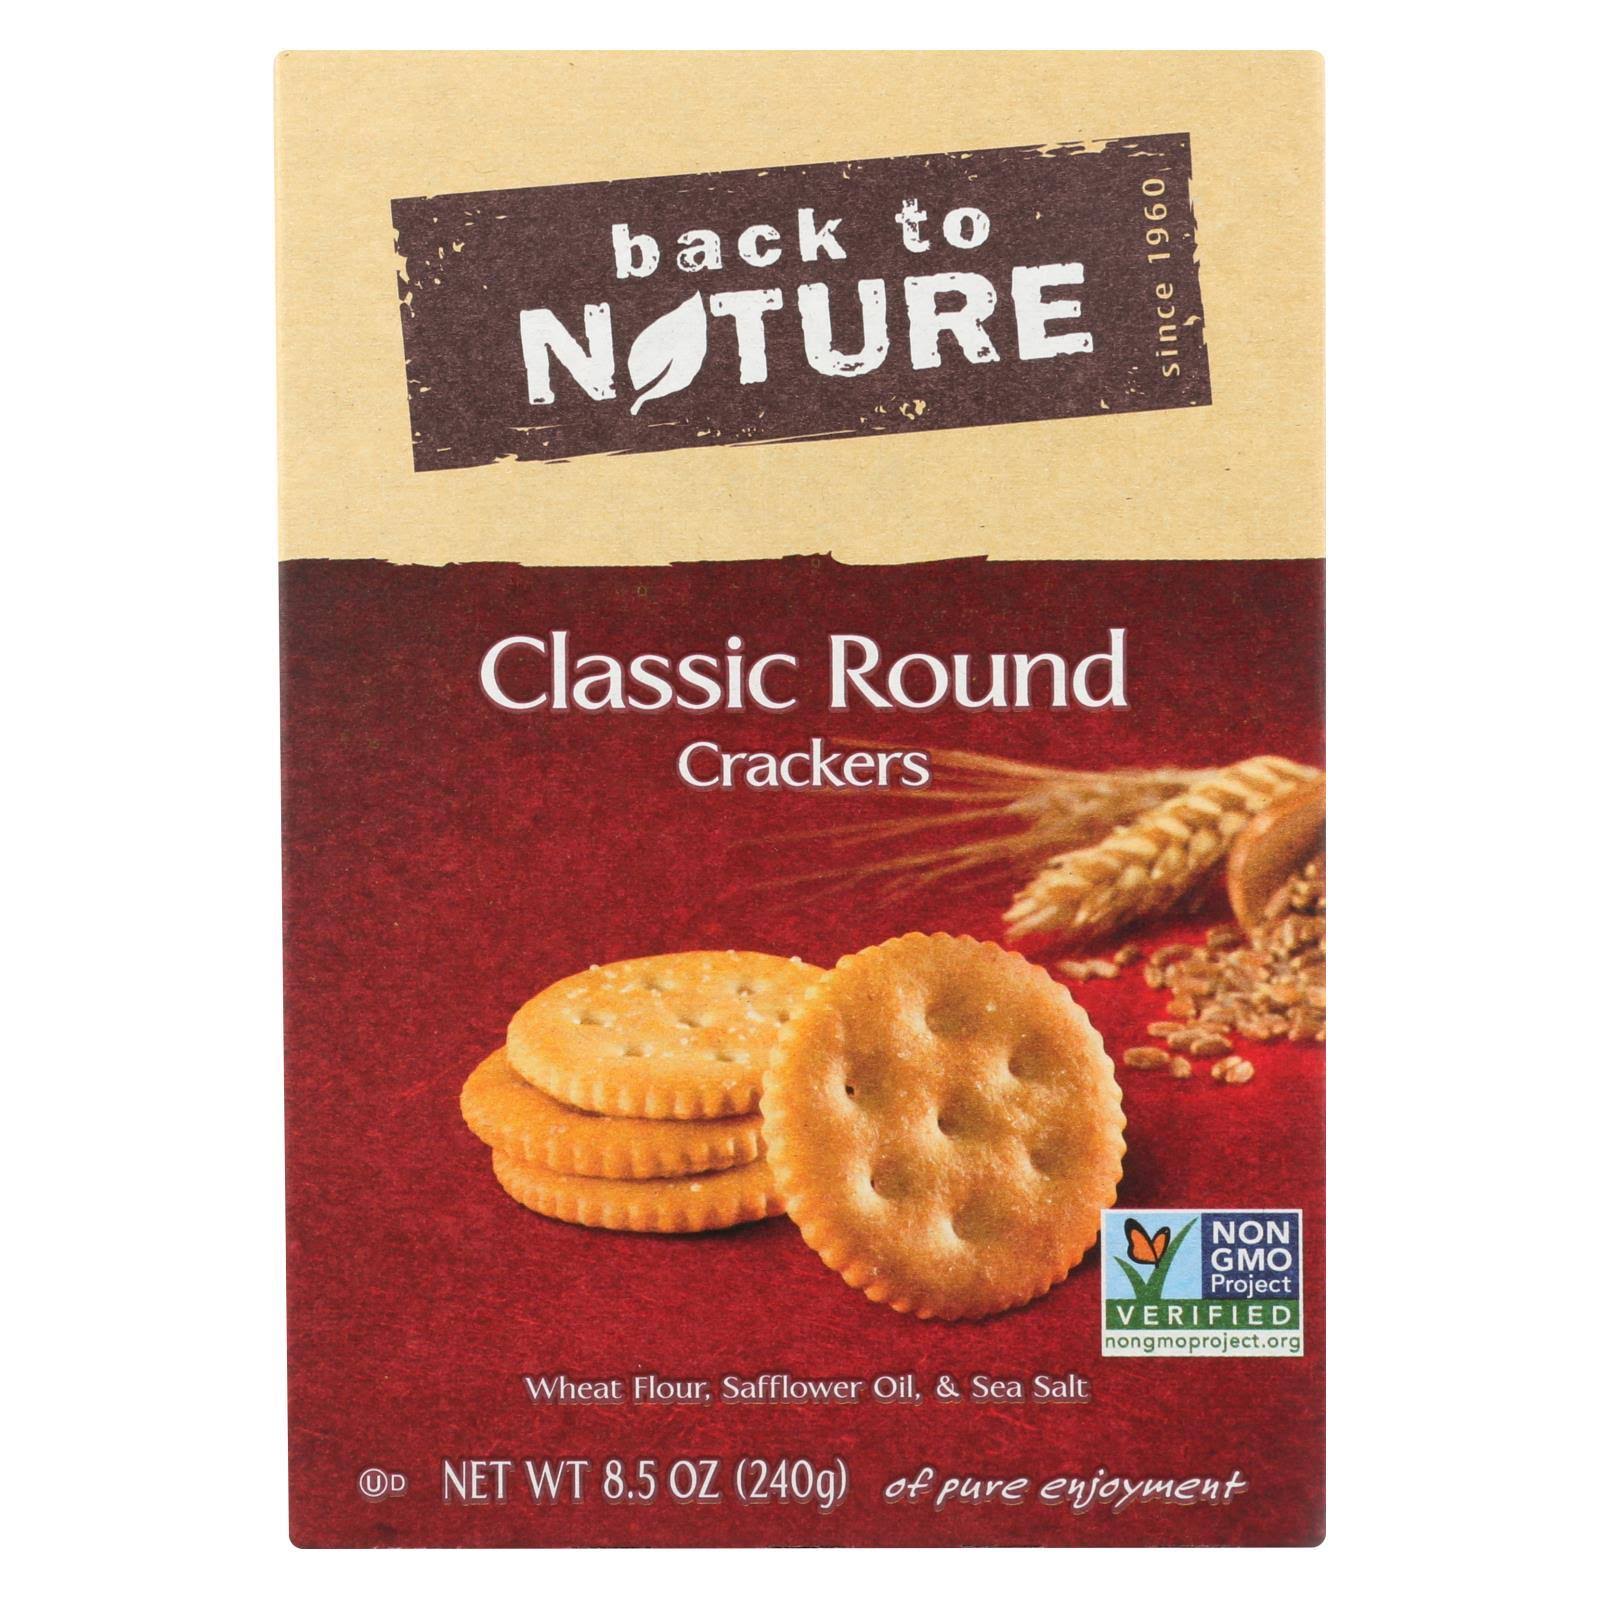 Back To Nature Classic Rounds Crackers - 240g